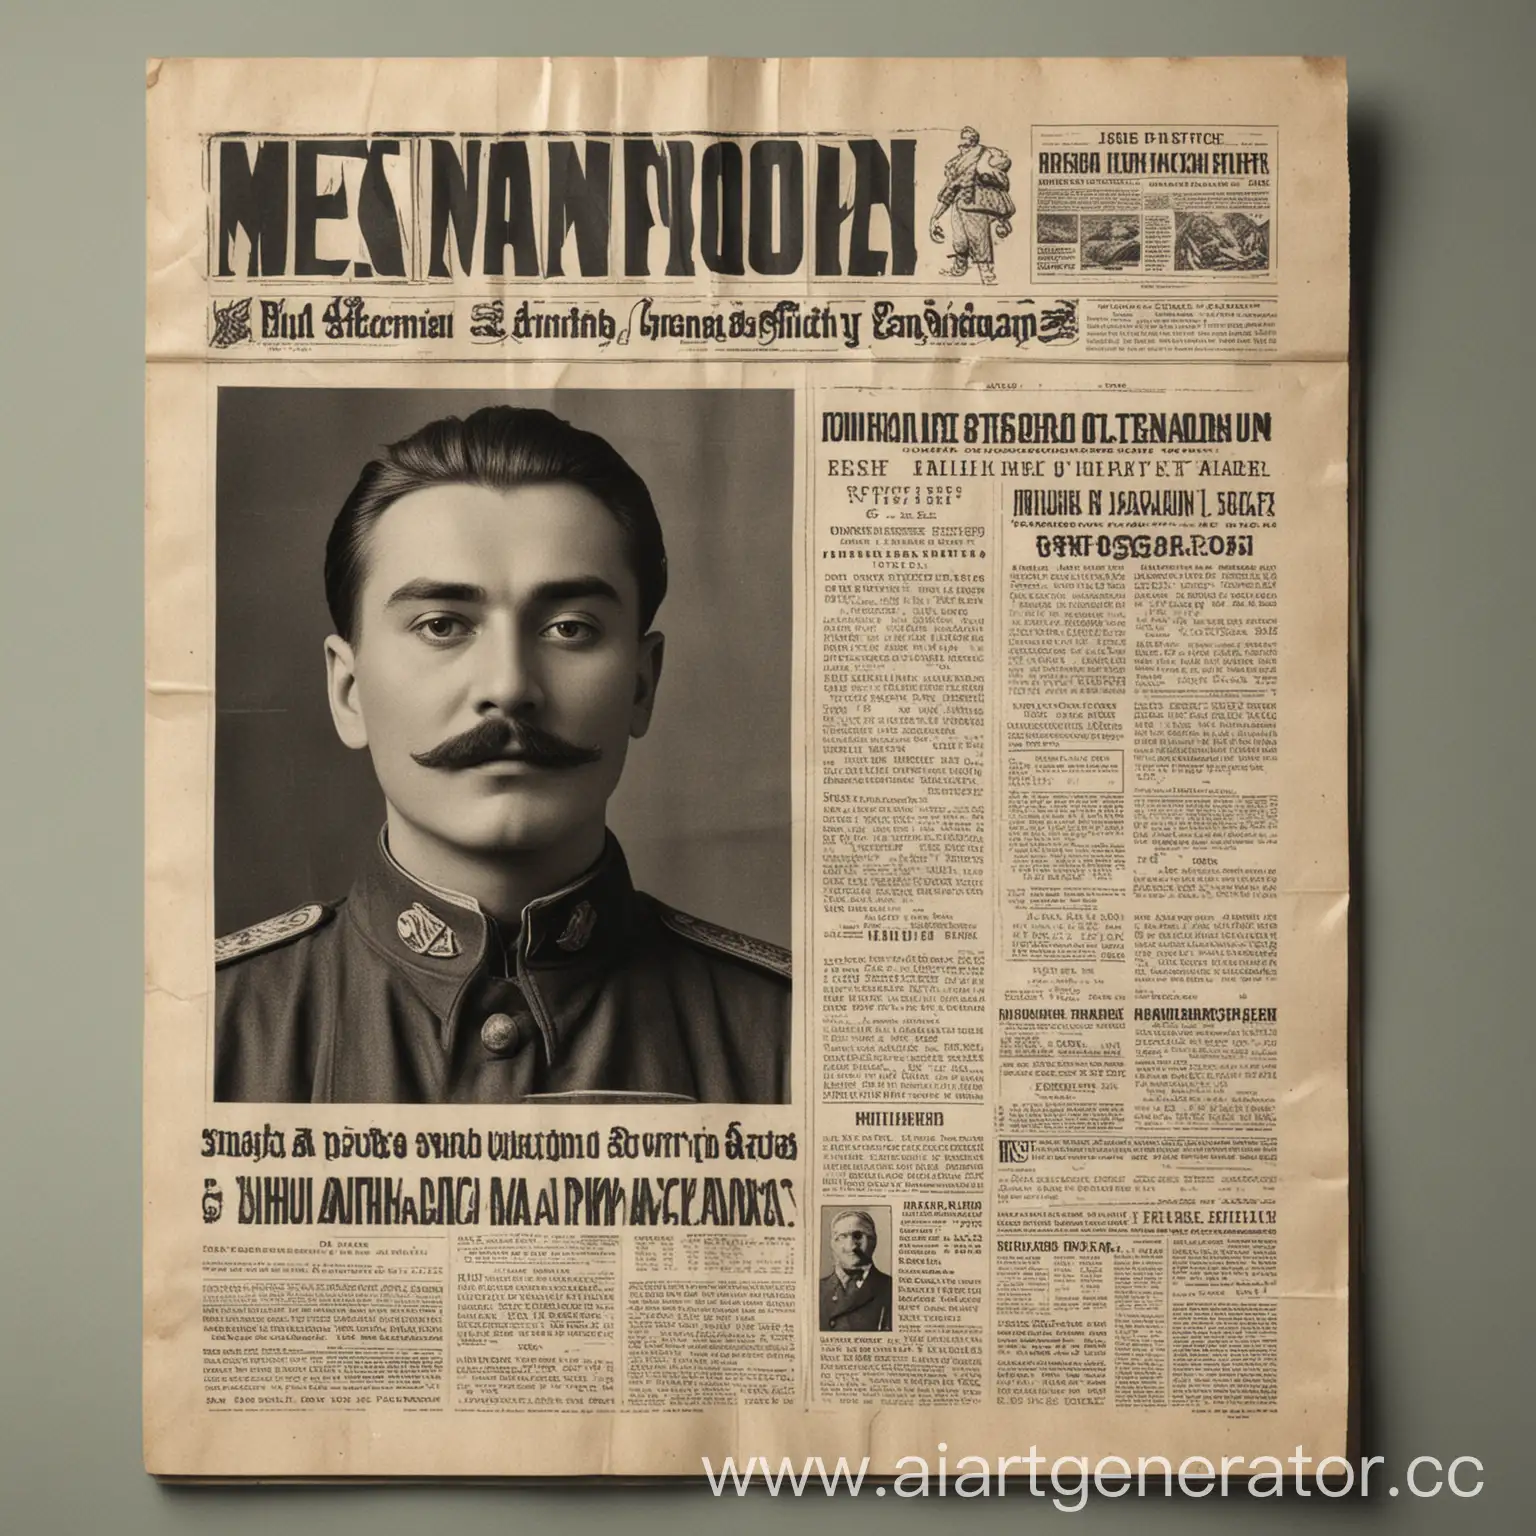 Vintage-Soviet-Newspaper-Advertisement-MockUp-from-the-1920s